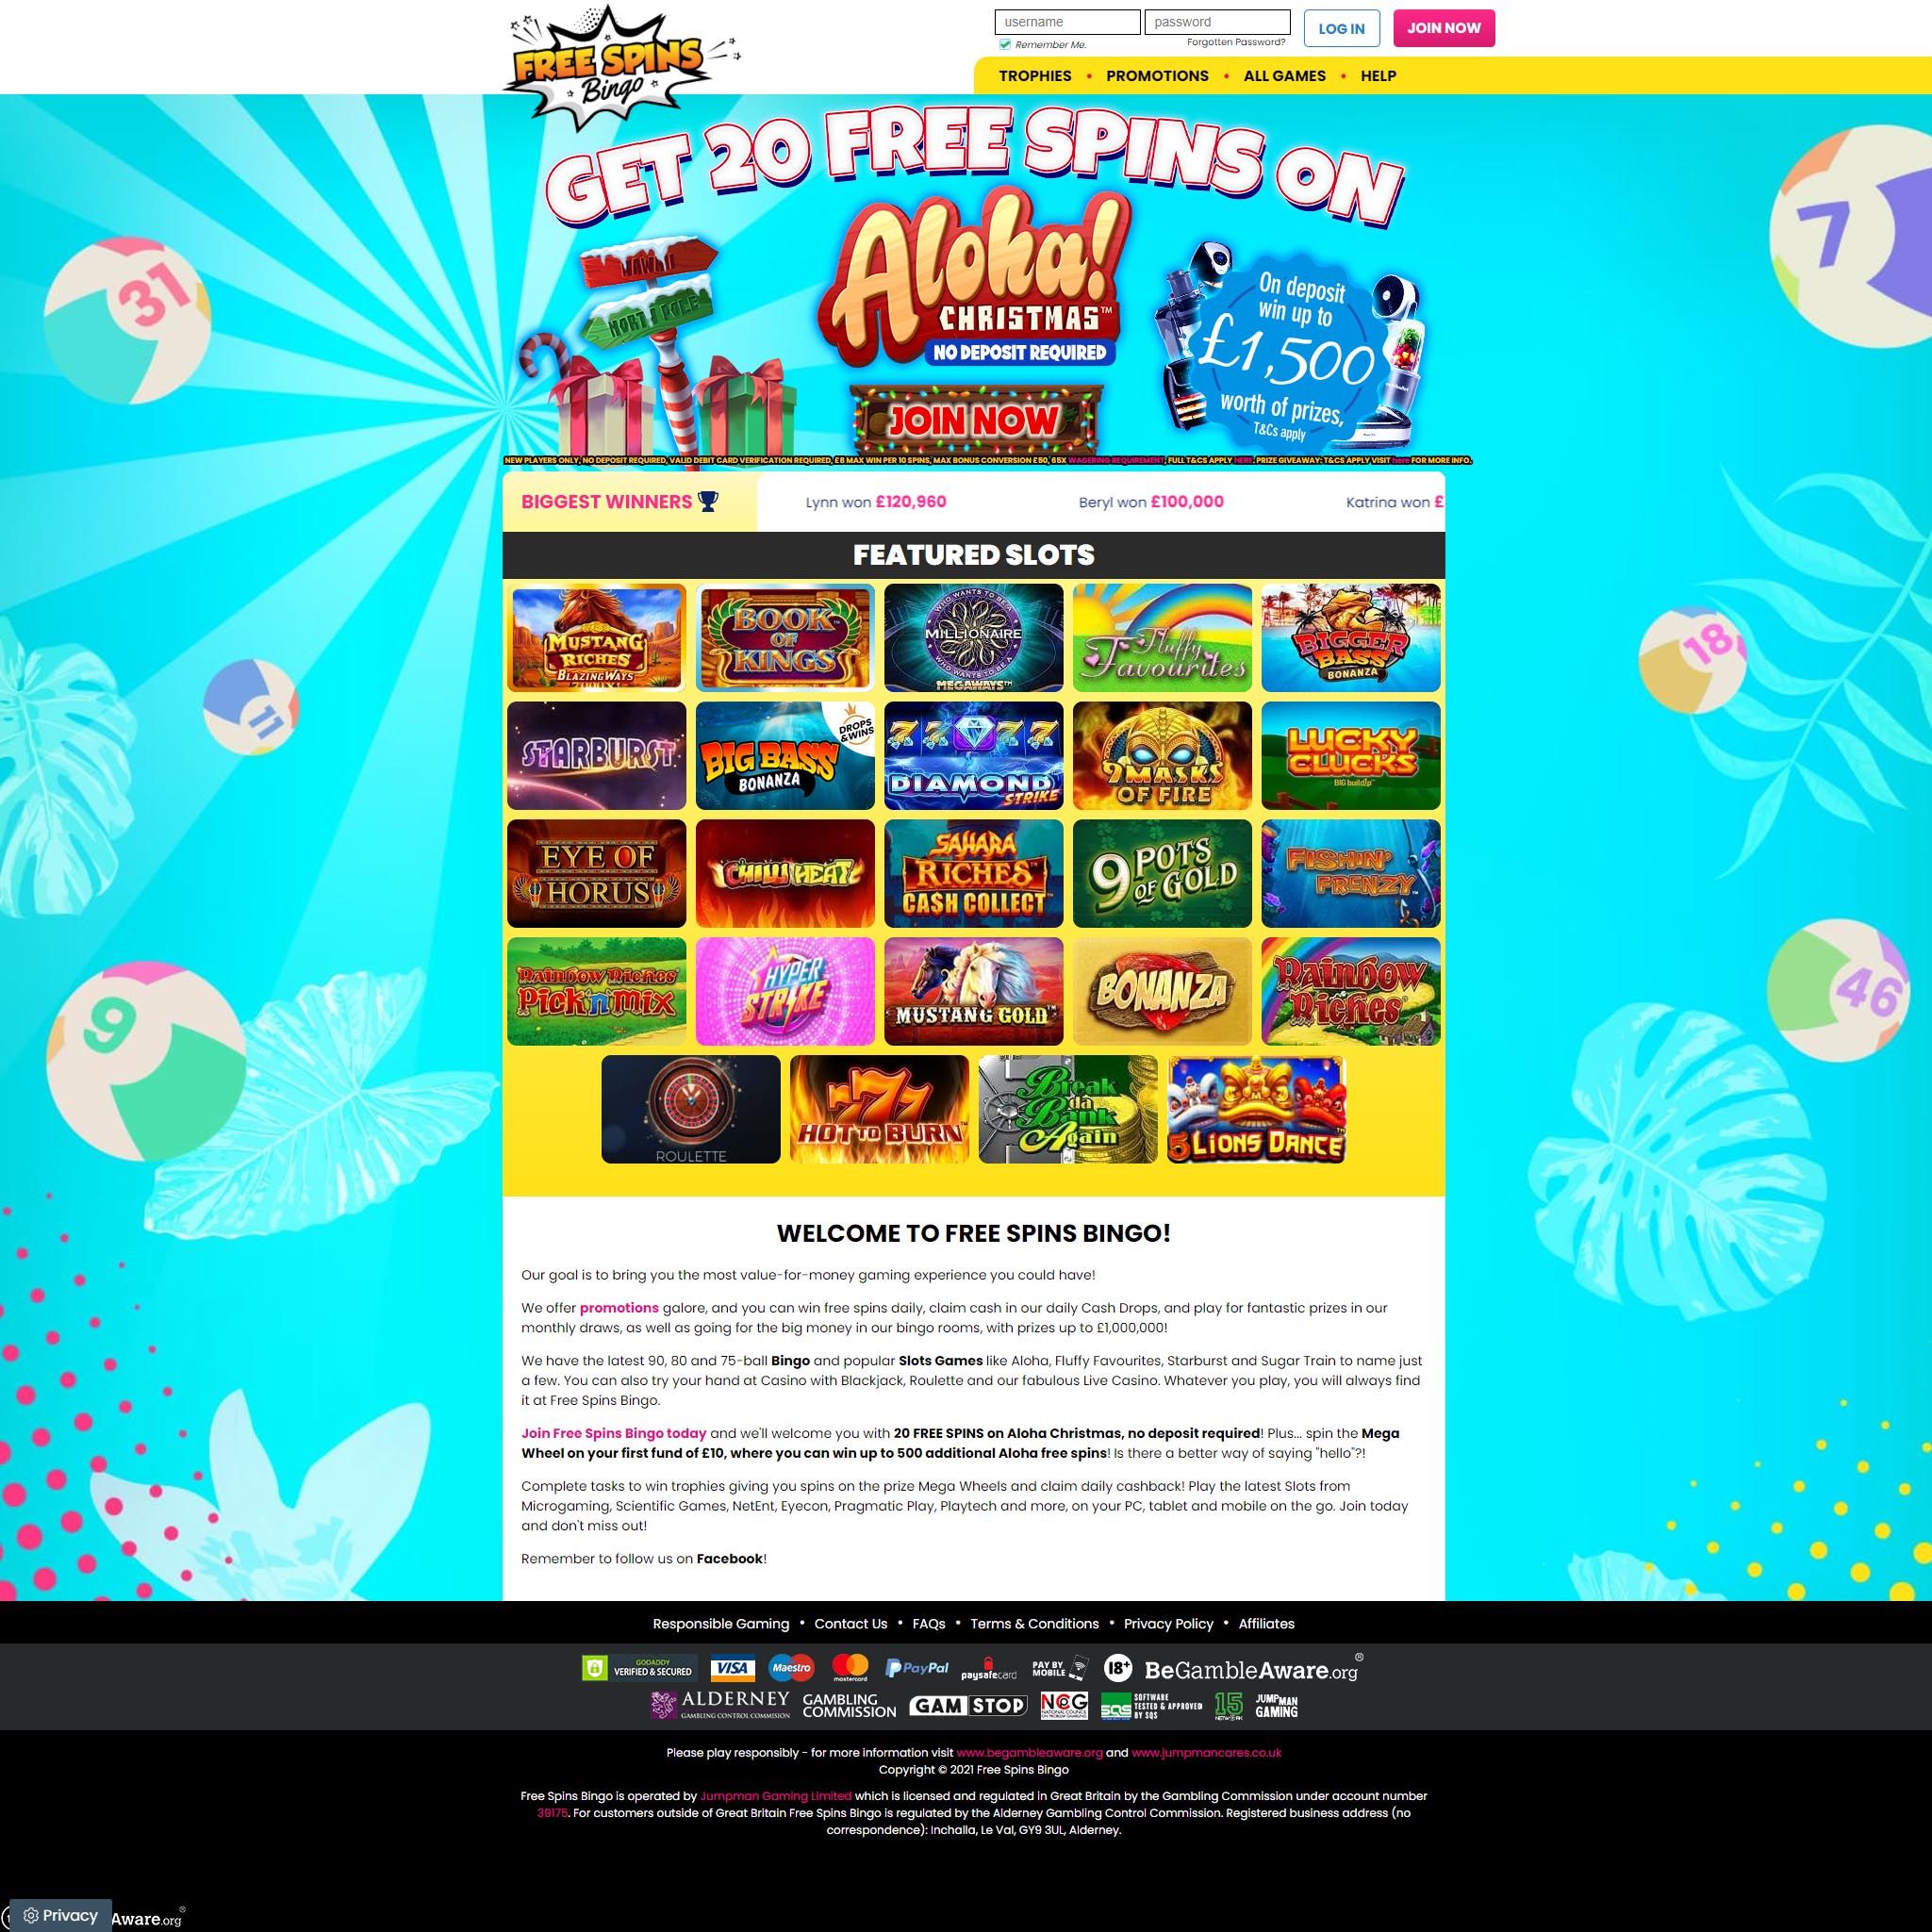 Free Spins Bingo UK review by Mr. Gamble